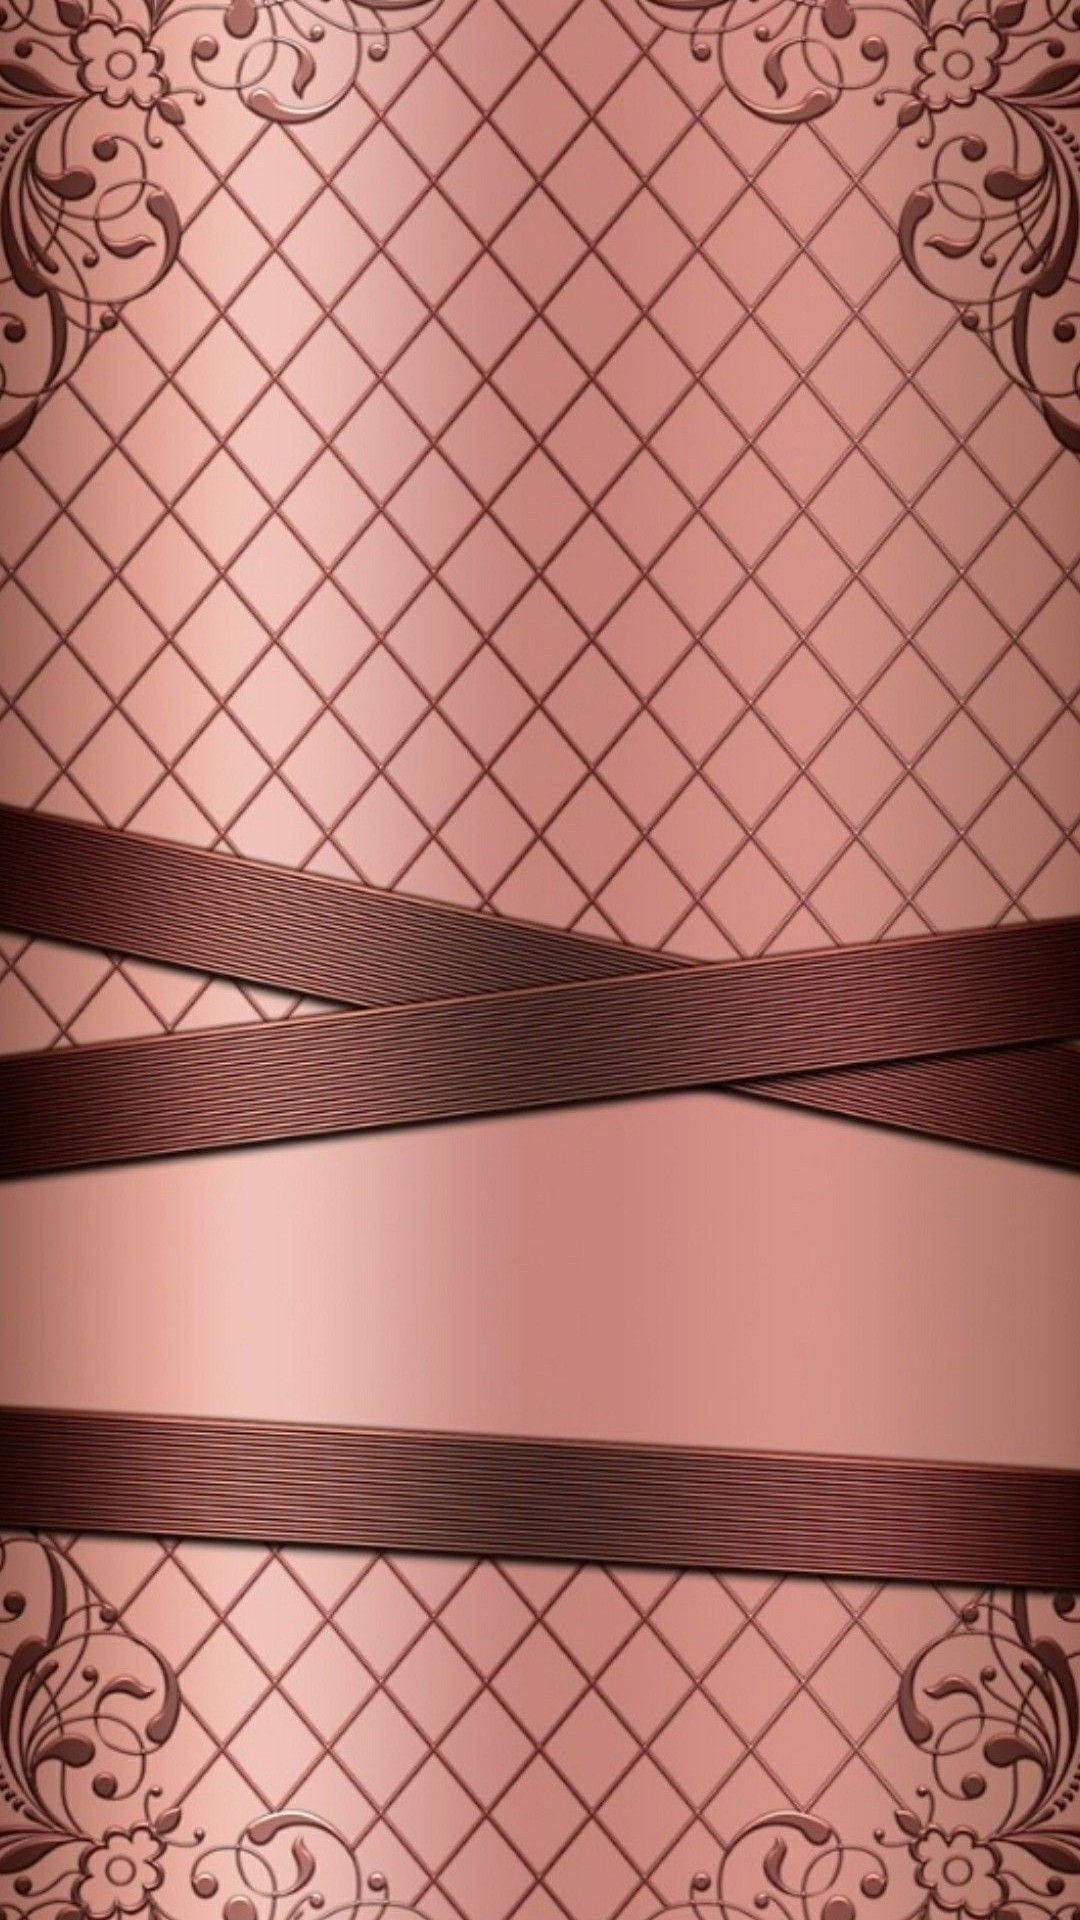 Lace Pattern Rose Gold Iphone Background